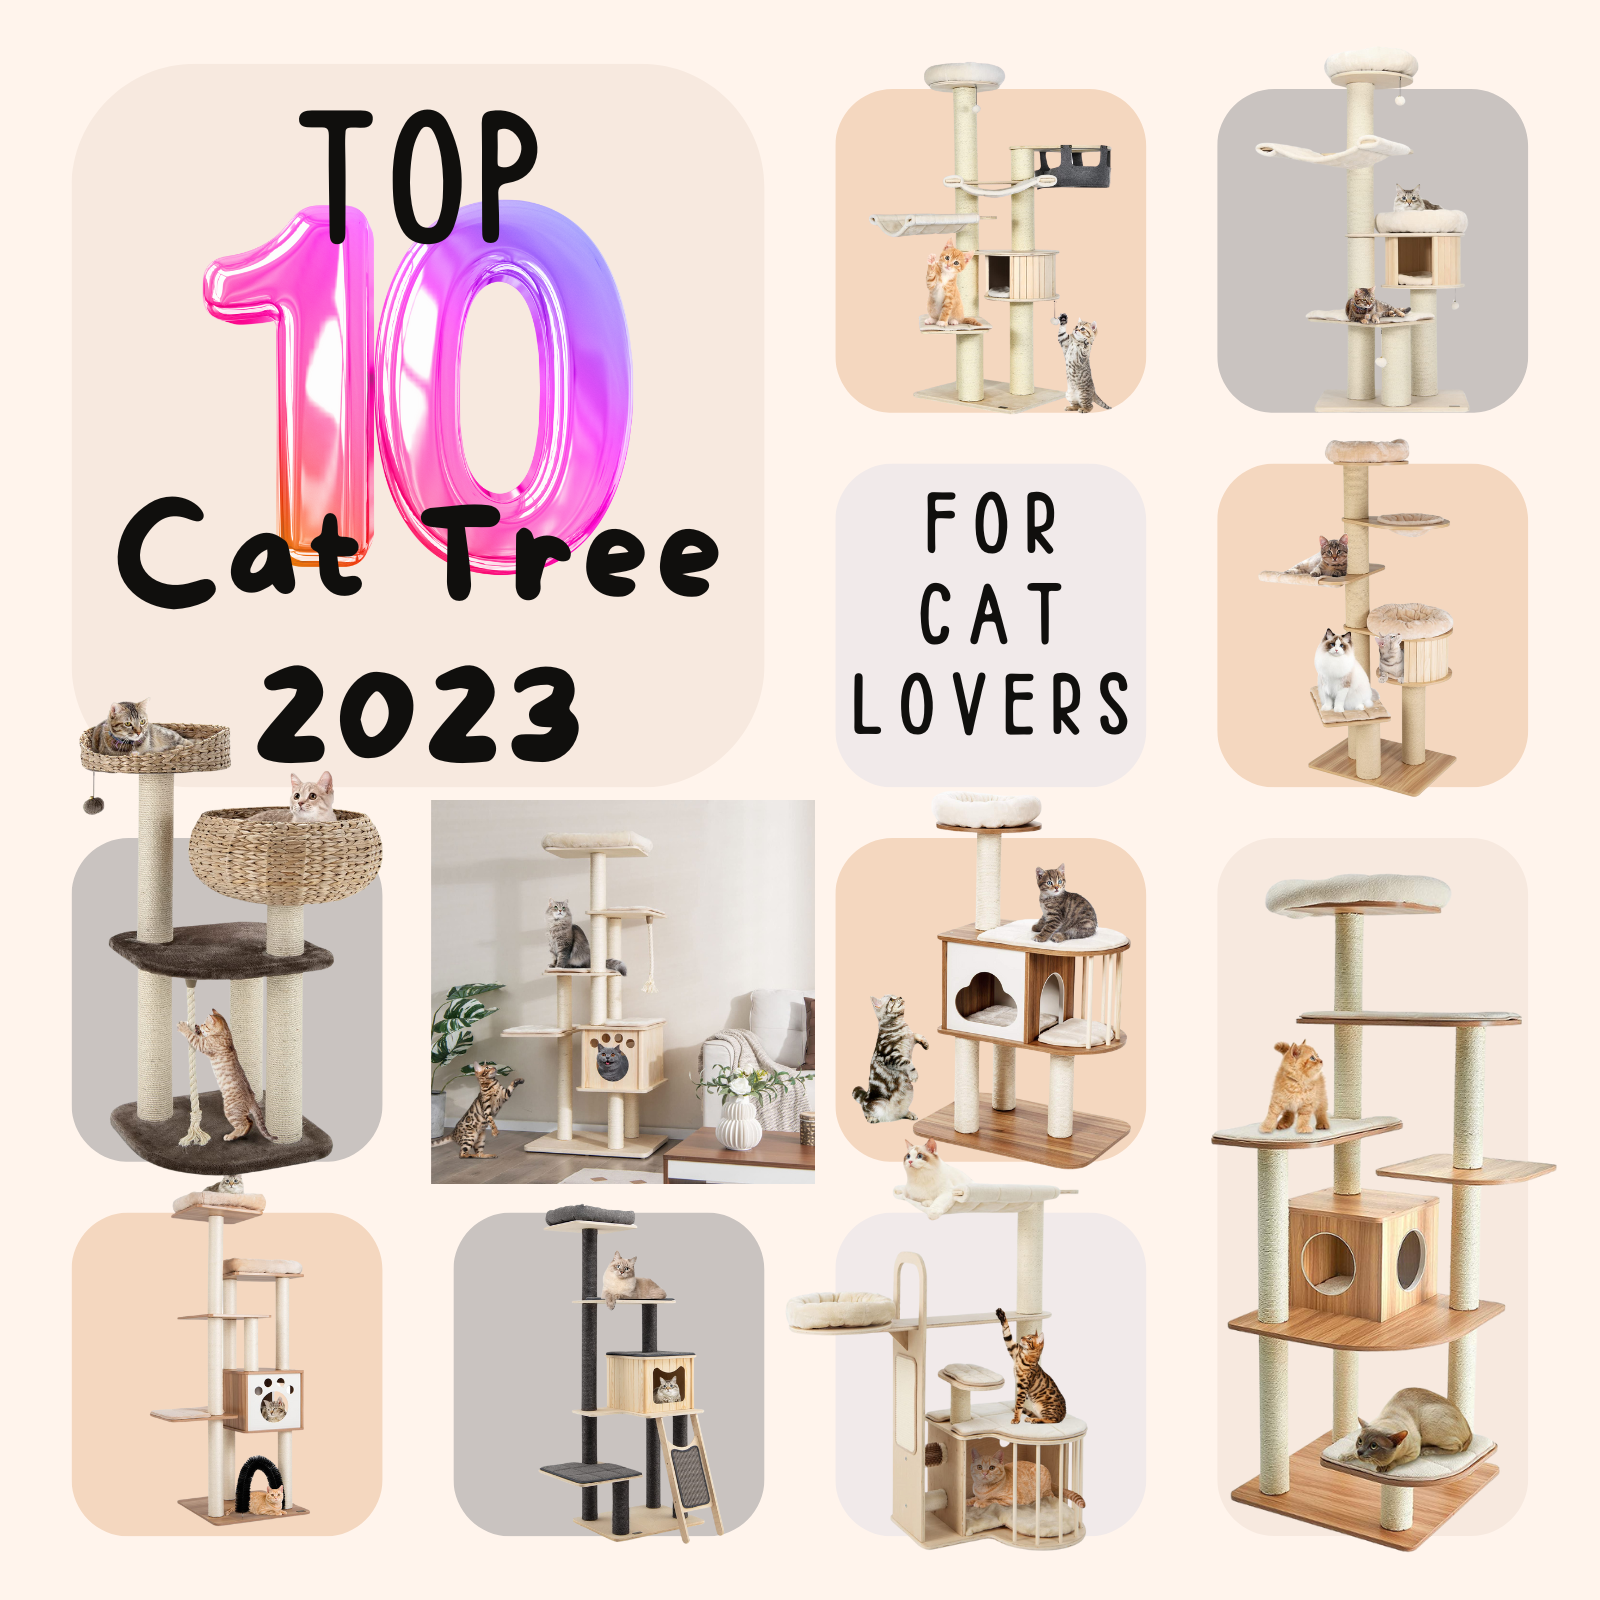 Top 10 Christmas Gifts for Feline Friends 2023 - Tangkula